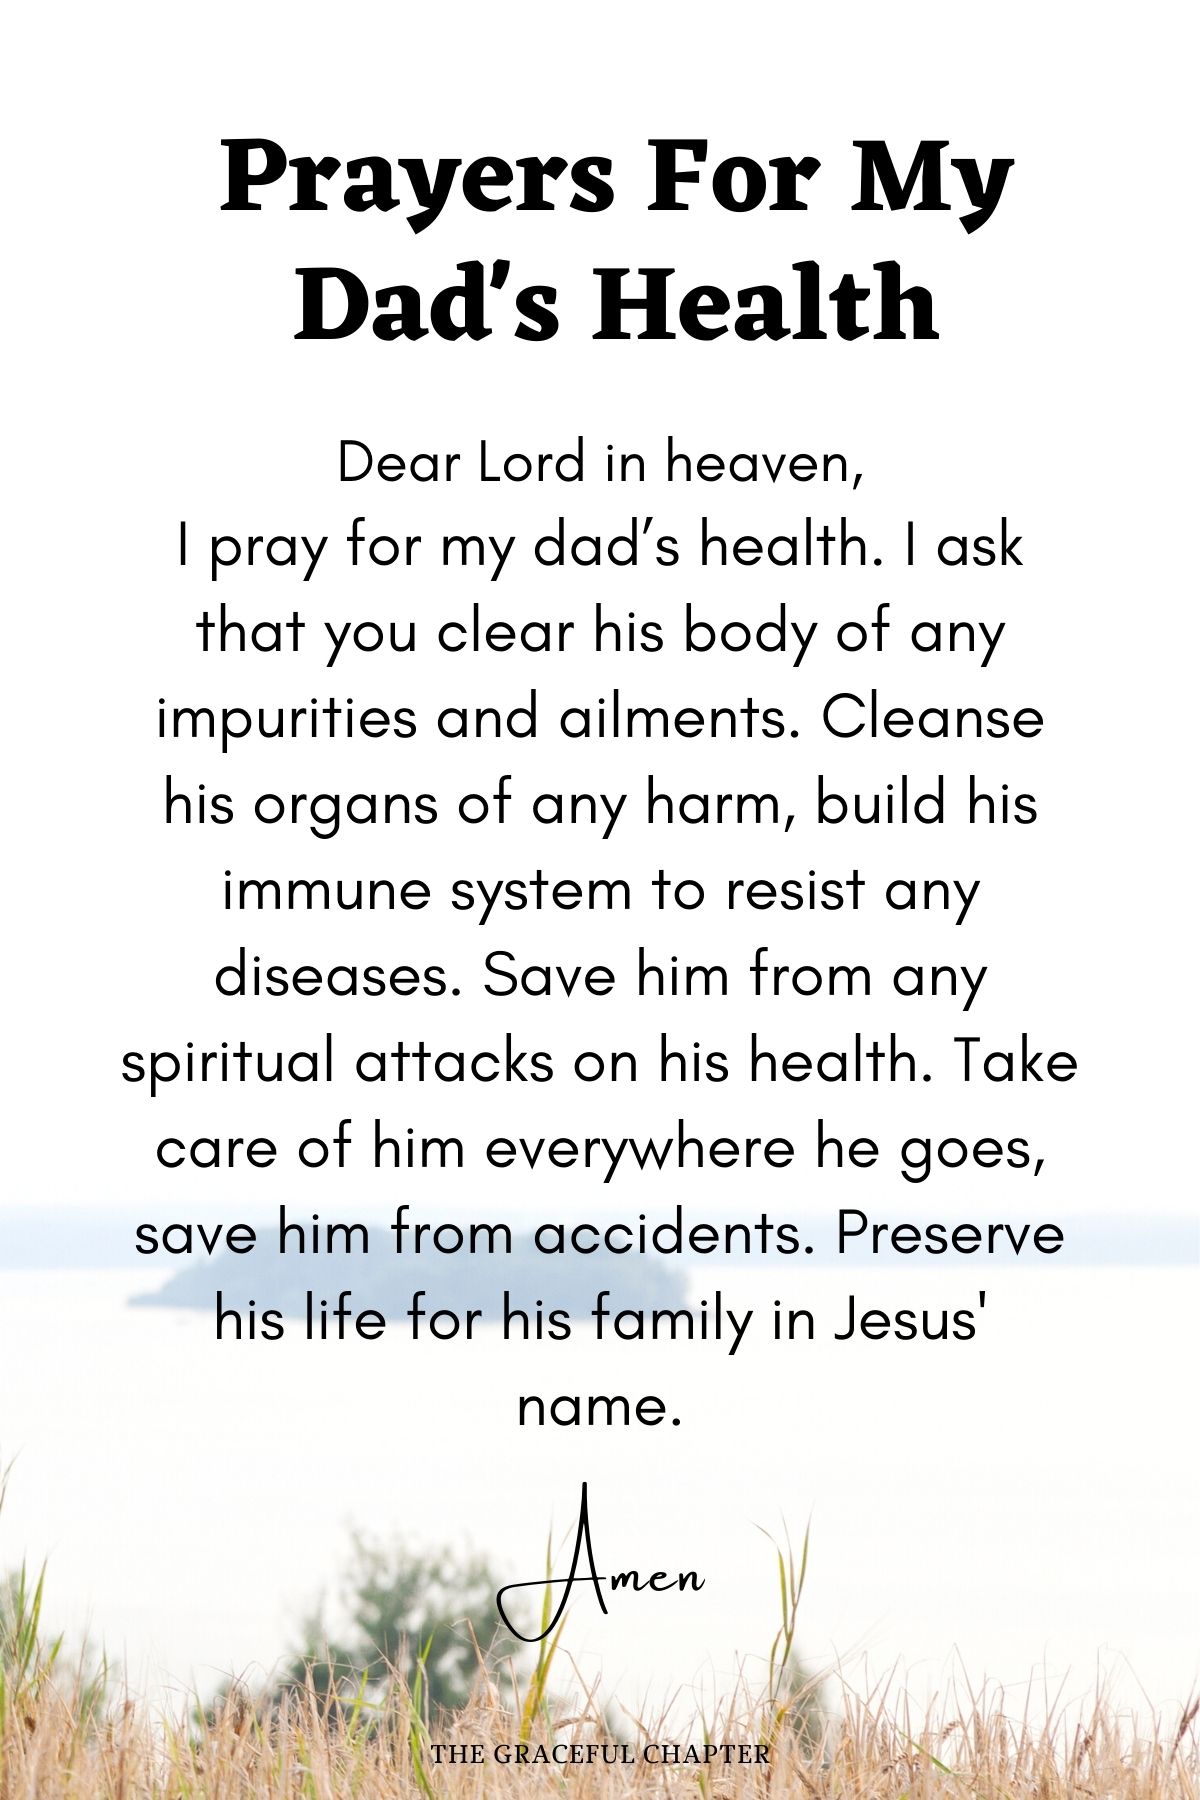 Prayers for my dad's health